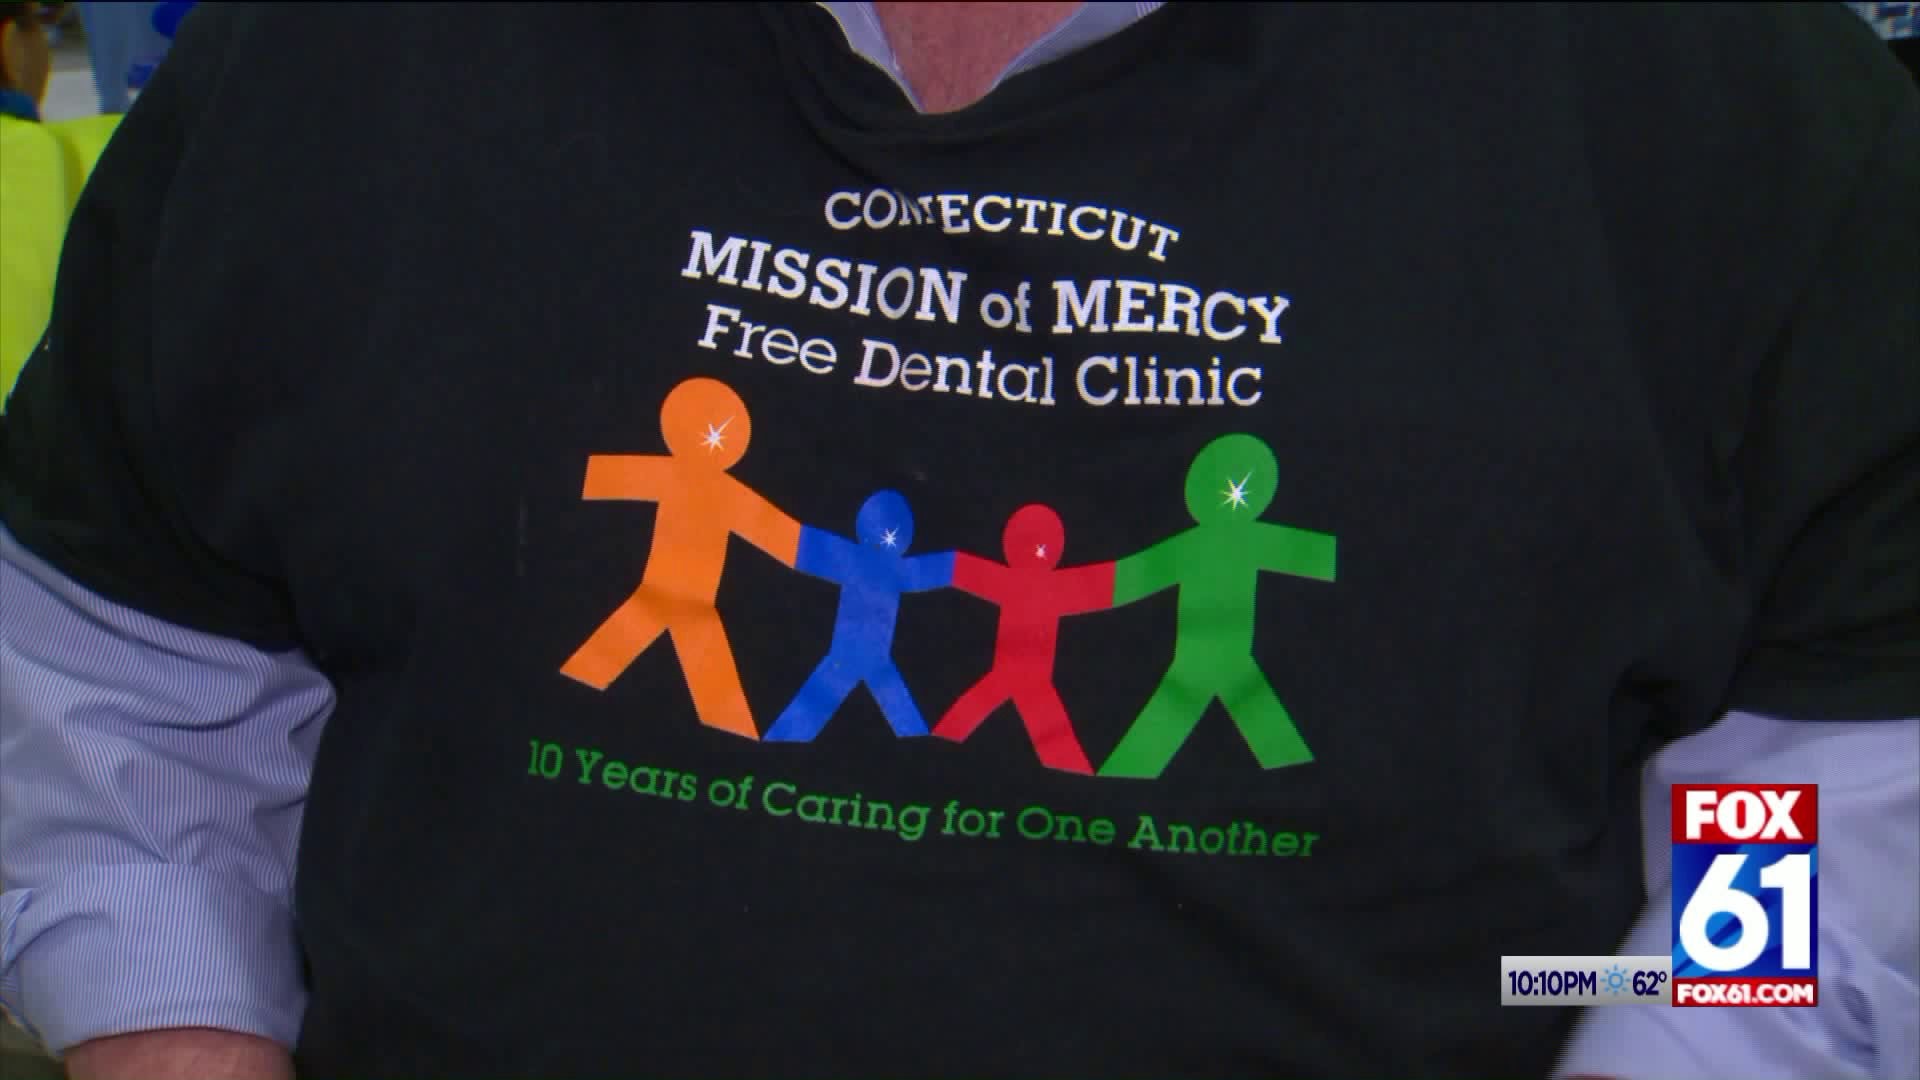 WILLIMANTIC DENTAL CLINIC SERVES MORE THAN 800 PATIENTS FOR FREE